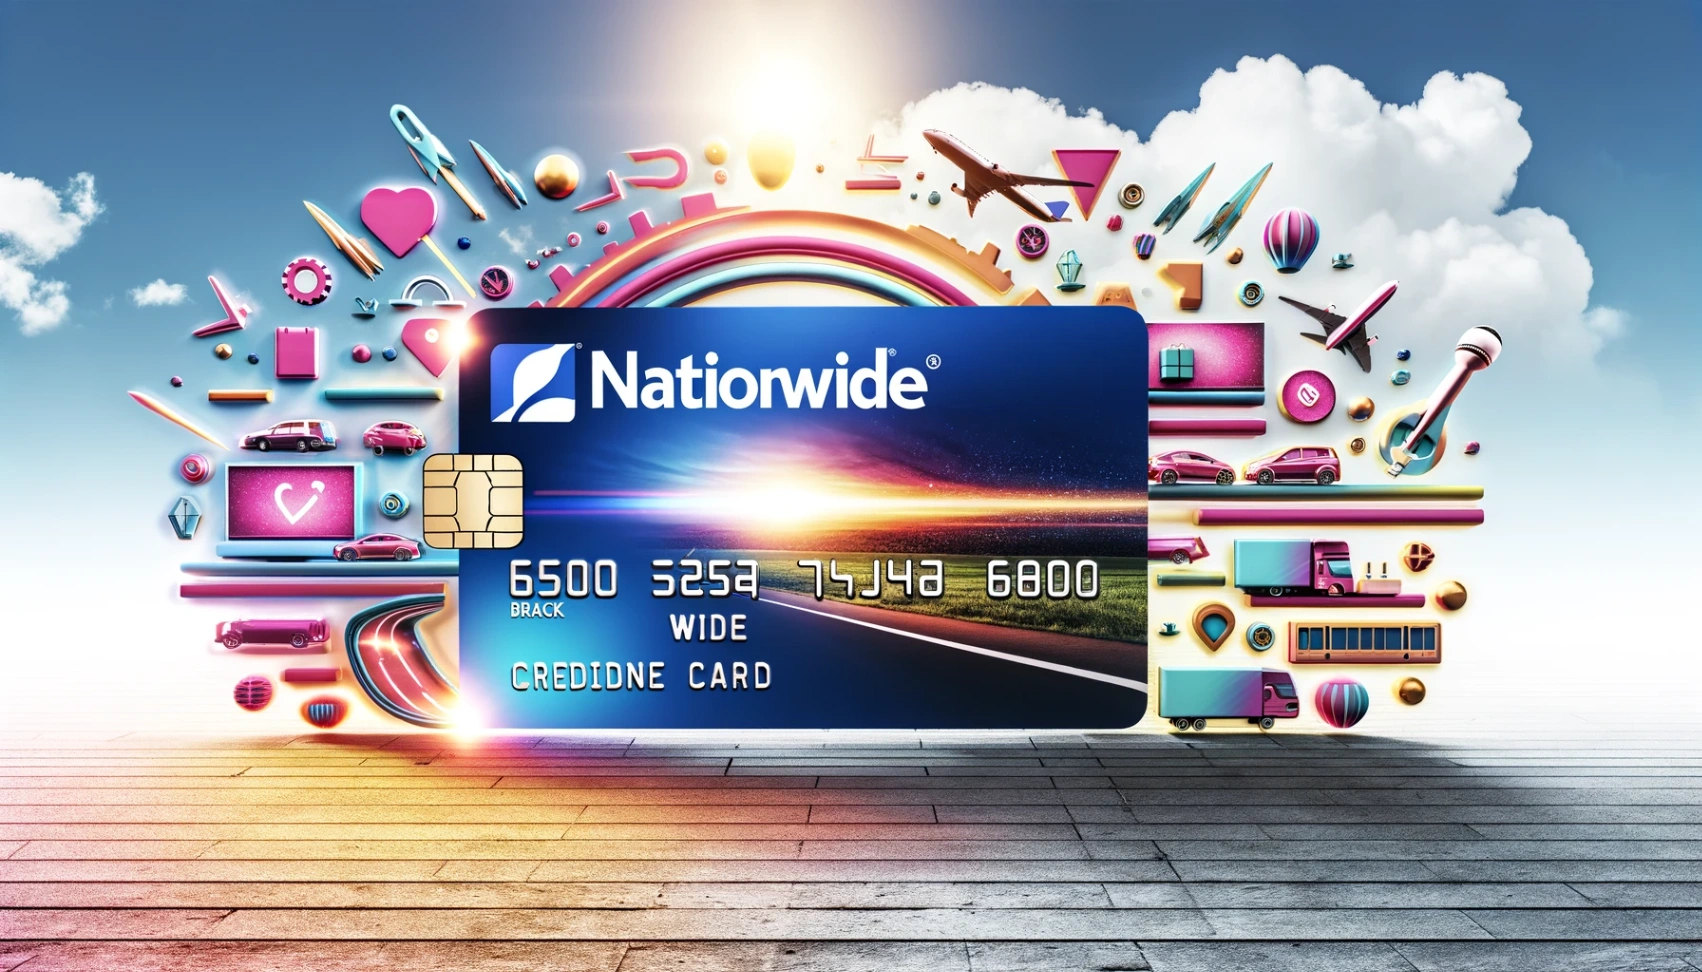 Nationwide Credit Card - How to Apply Online